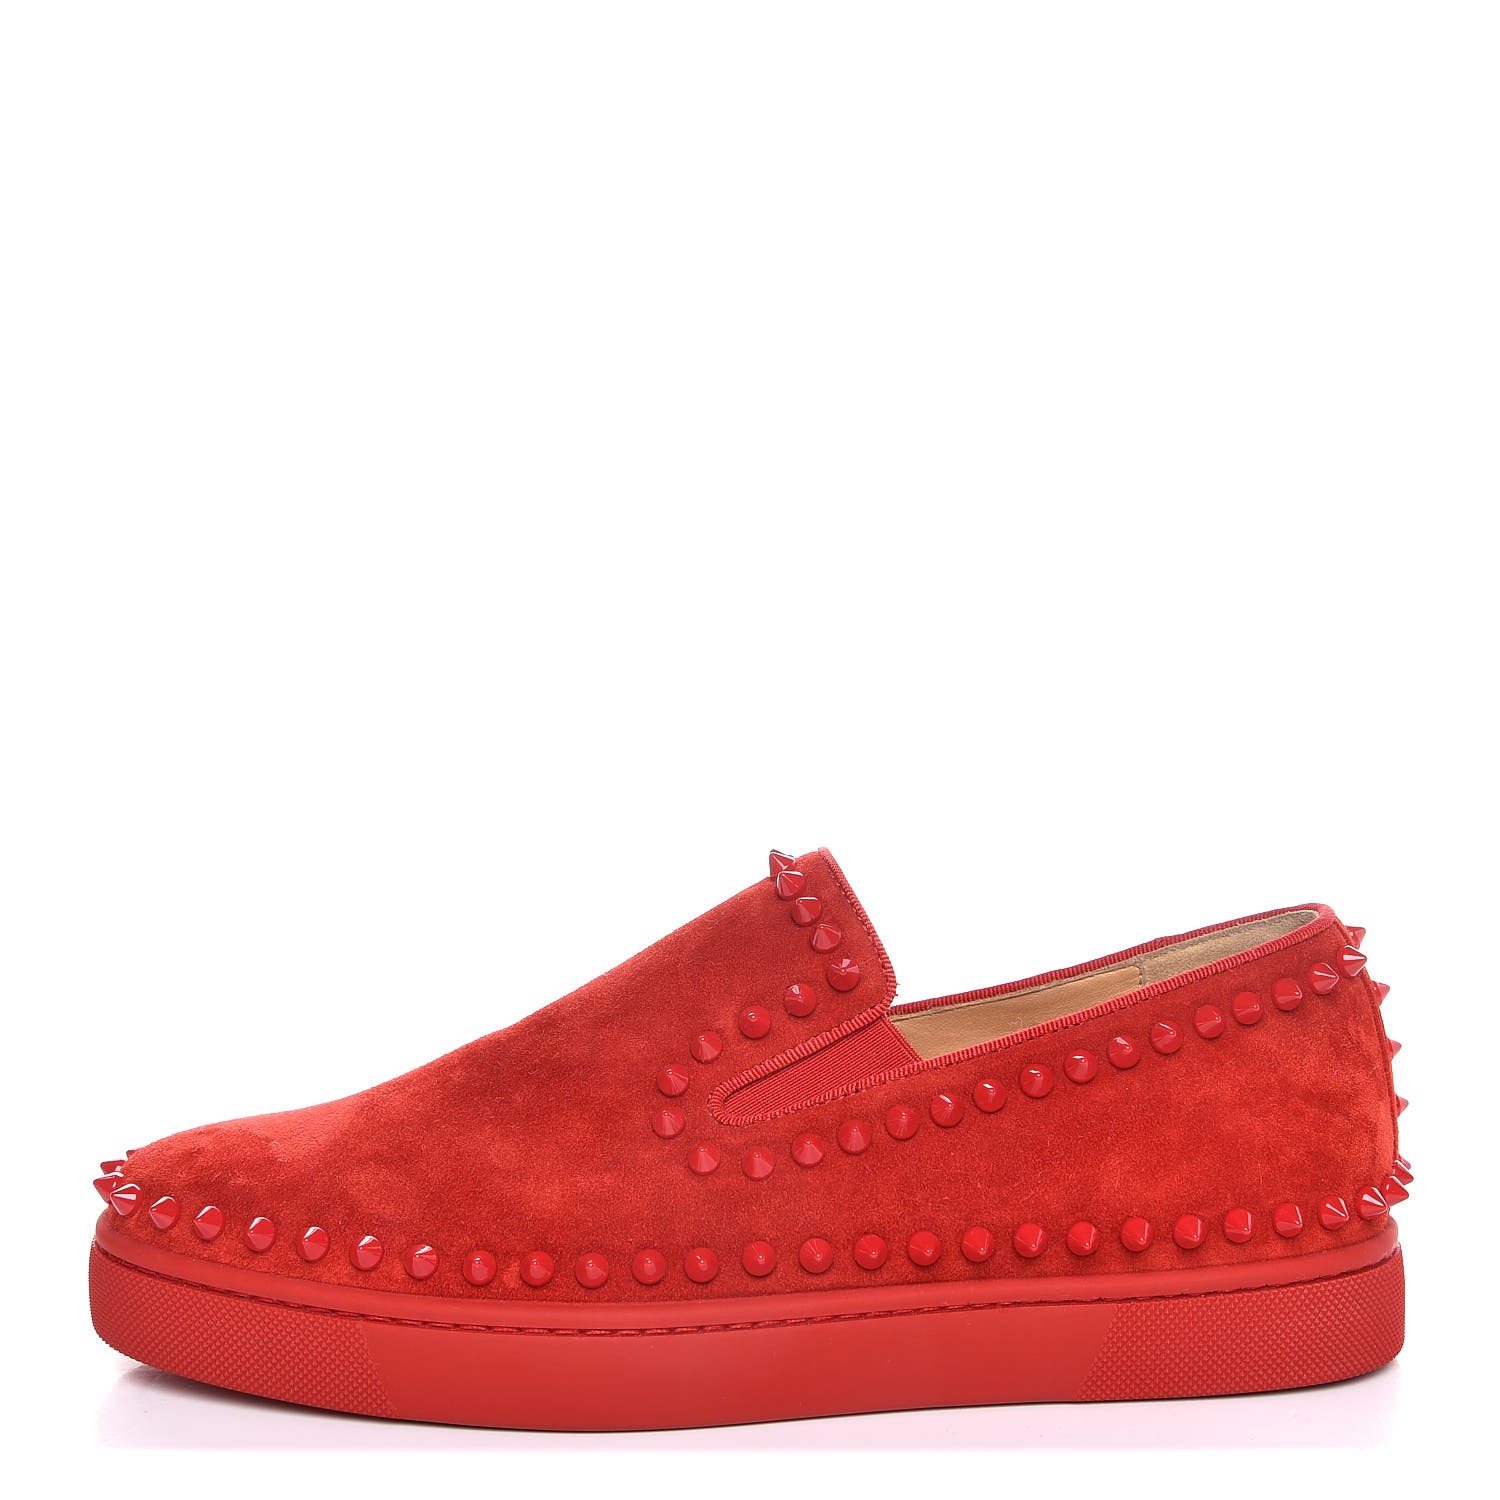 CHRISTIAN LOUBOUTIN Mens Suede Spikes Pik Boat Flat 39 Red 328290 